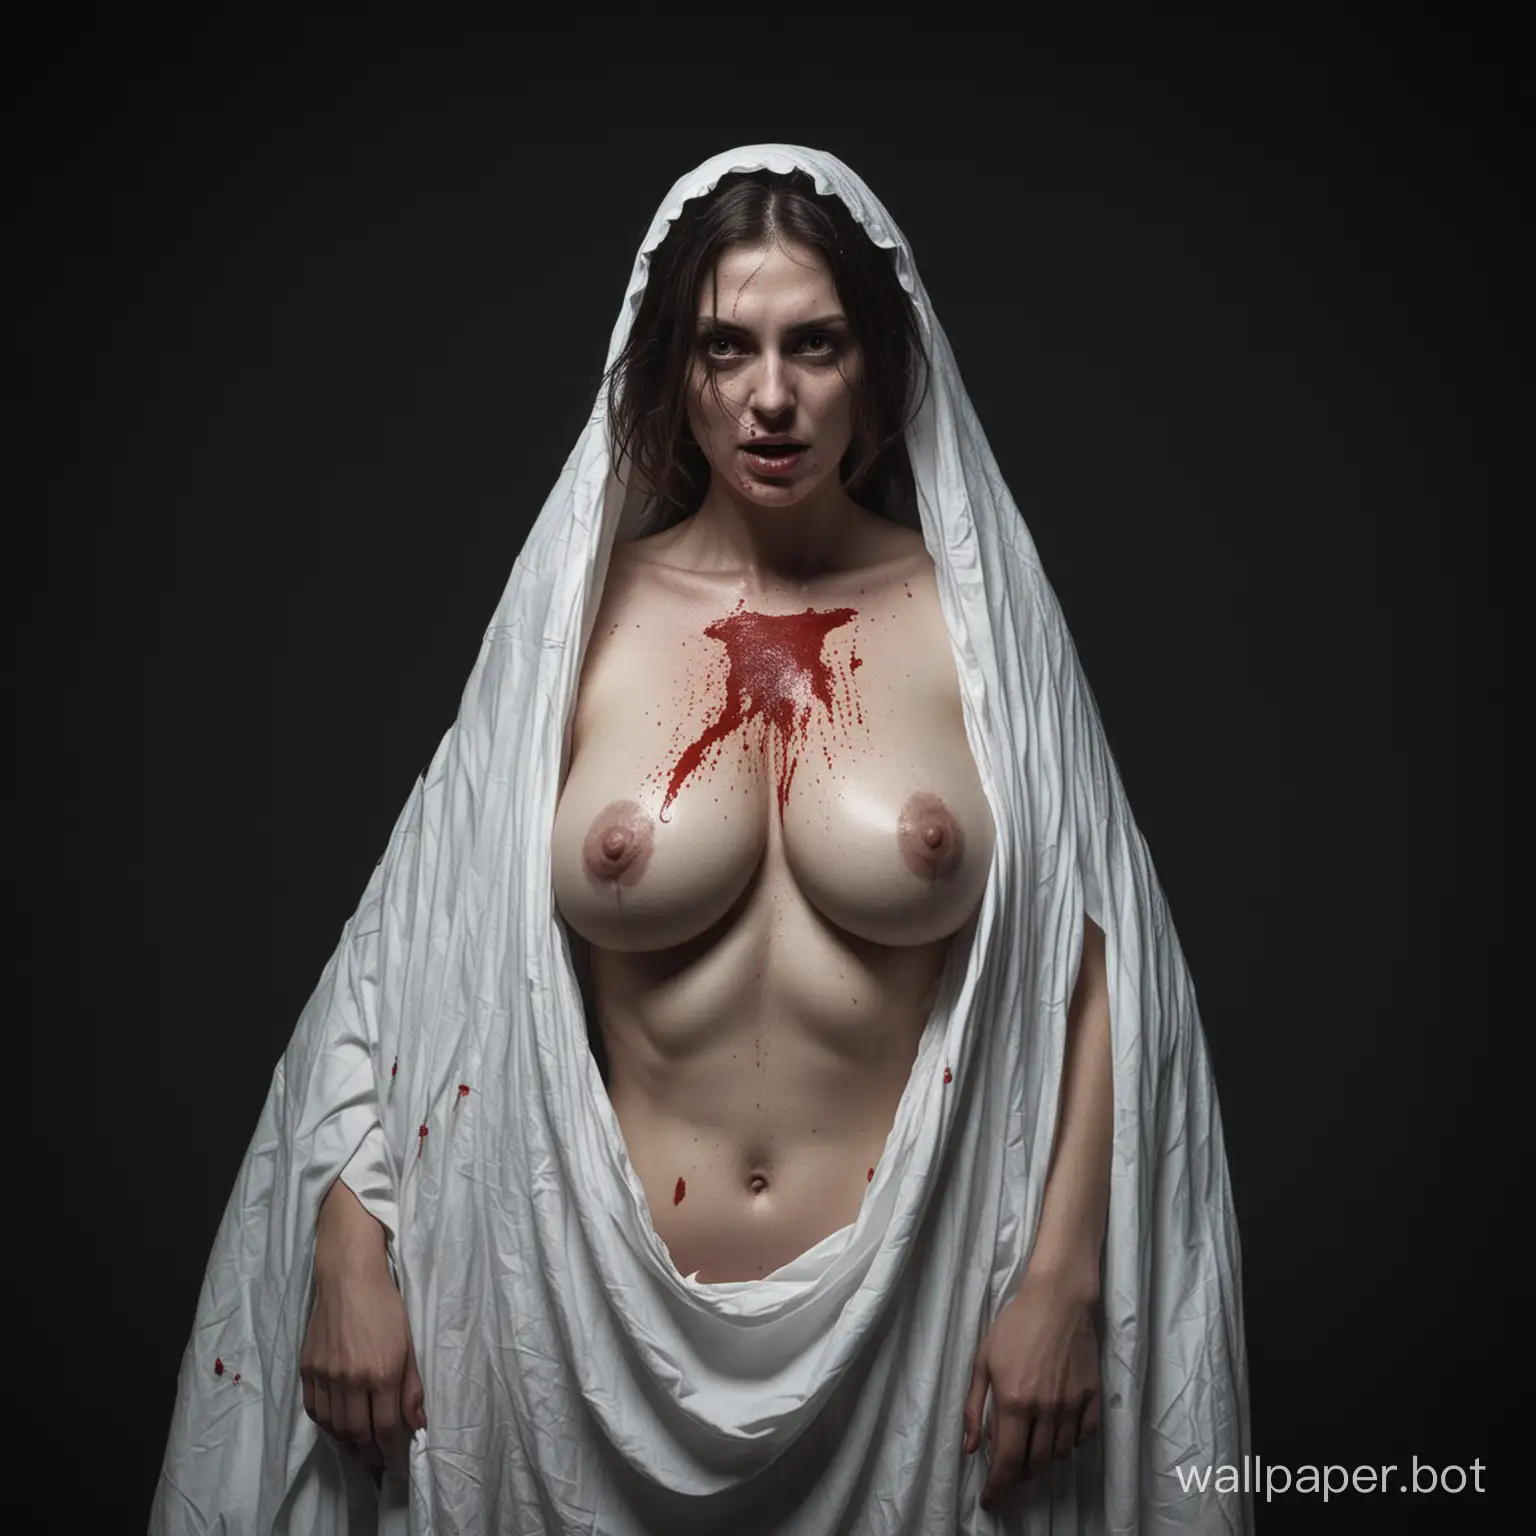 Ethereal-Bloodied-Woman-Haunting-Figure-in-Ghostly-Sheet